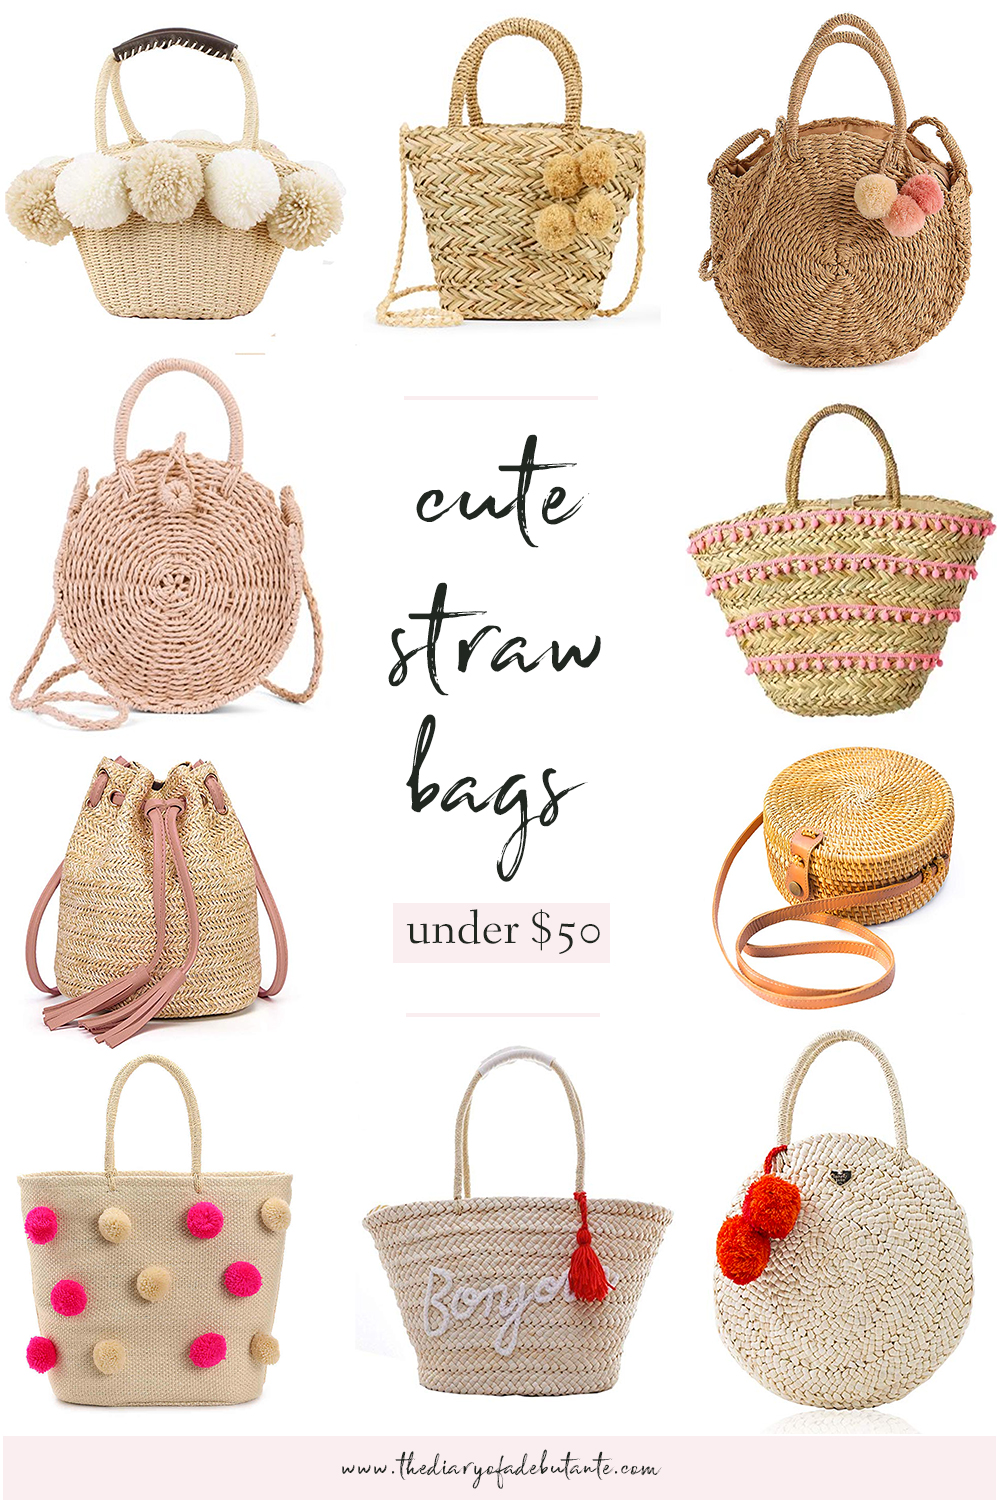 Cute Straw Bags for Summer under $50 by affordable fashion blogger Stephanie Ziajka from Diary of a Debutante, affordable summer handbags, affordable summer tote bag, straw pom pom tote bags, straw tassel tote bags